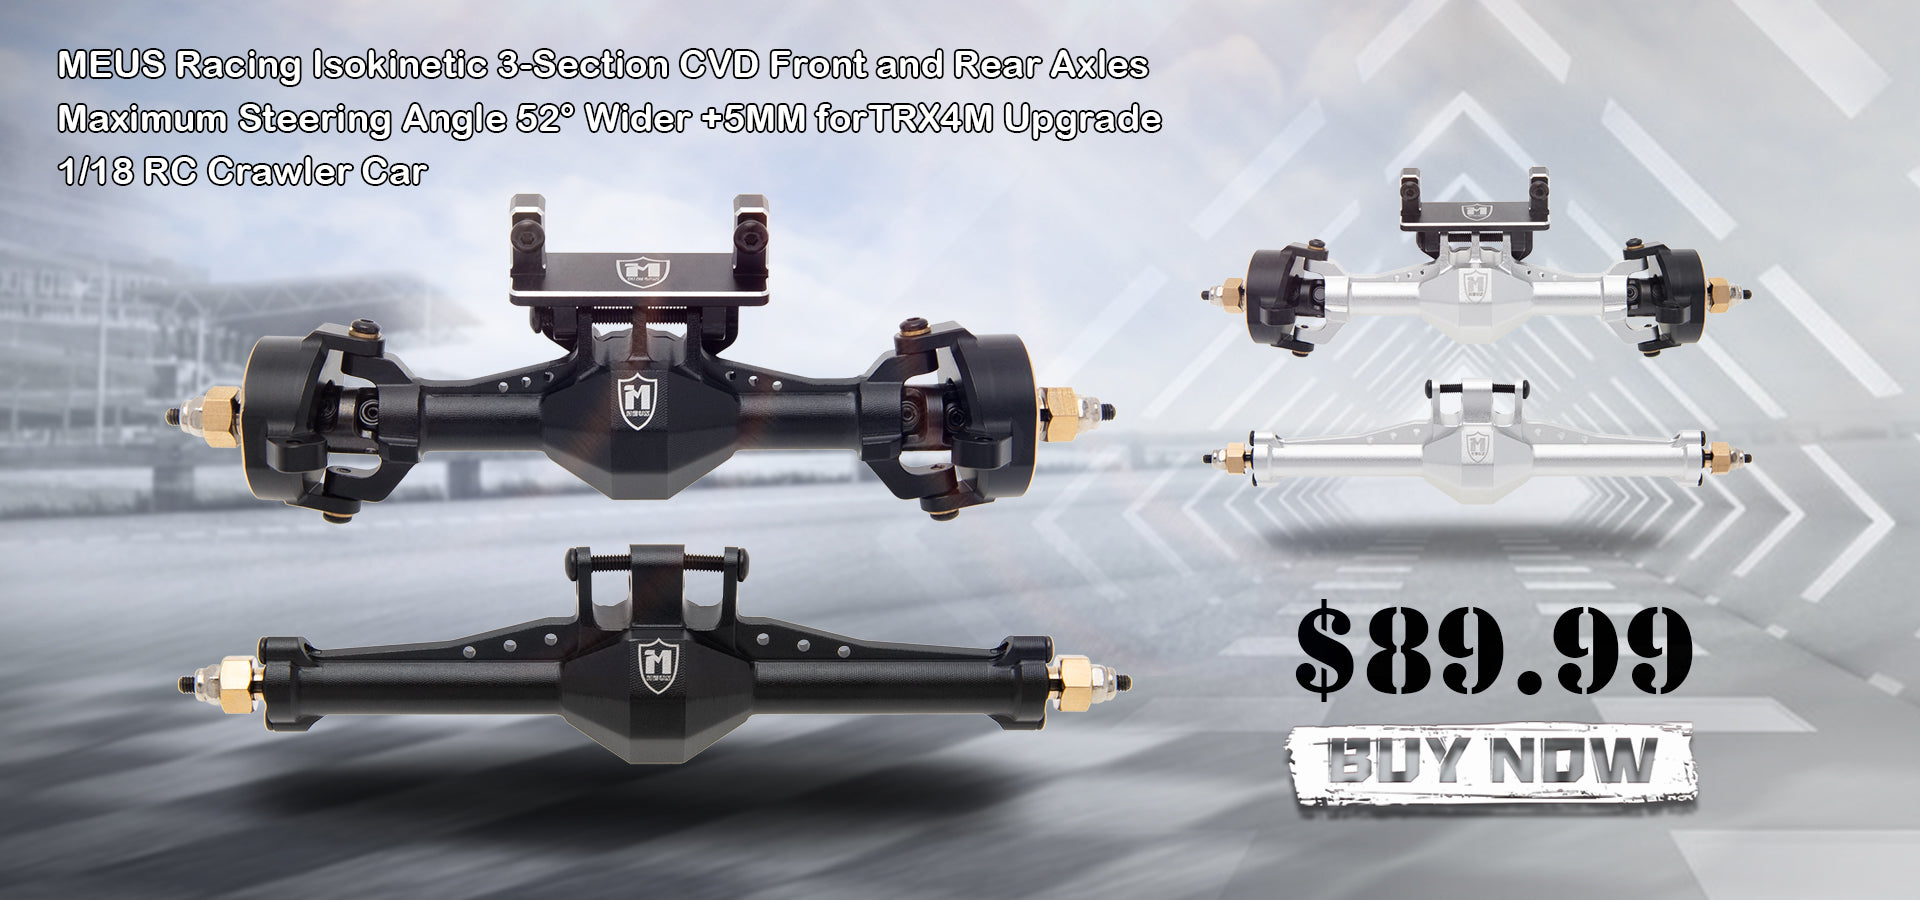 MEUS Racing Isokinetic 3-section CVD Front and Rear Axles